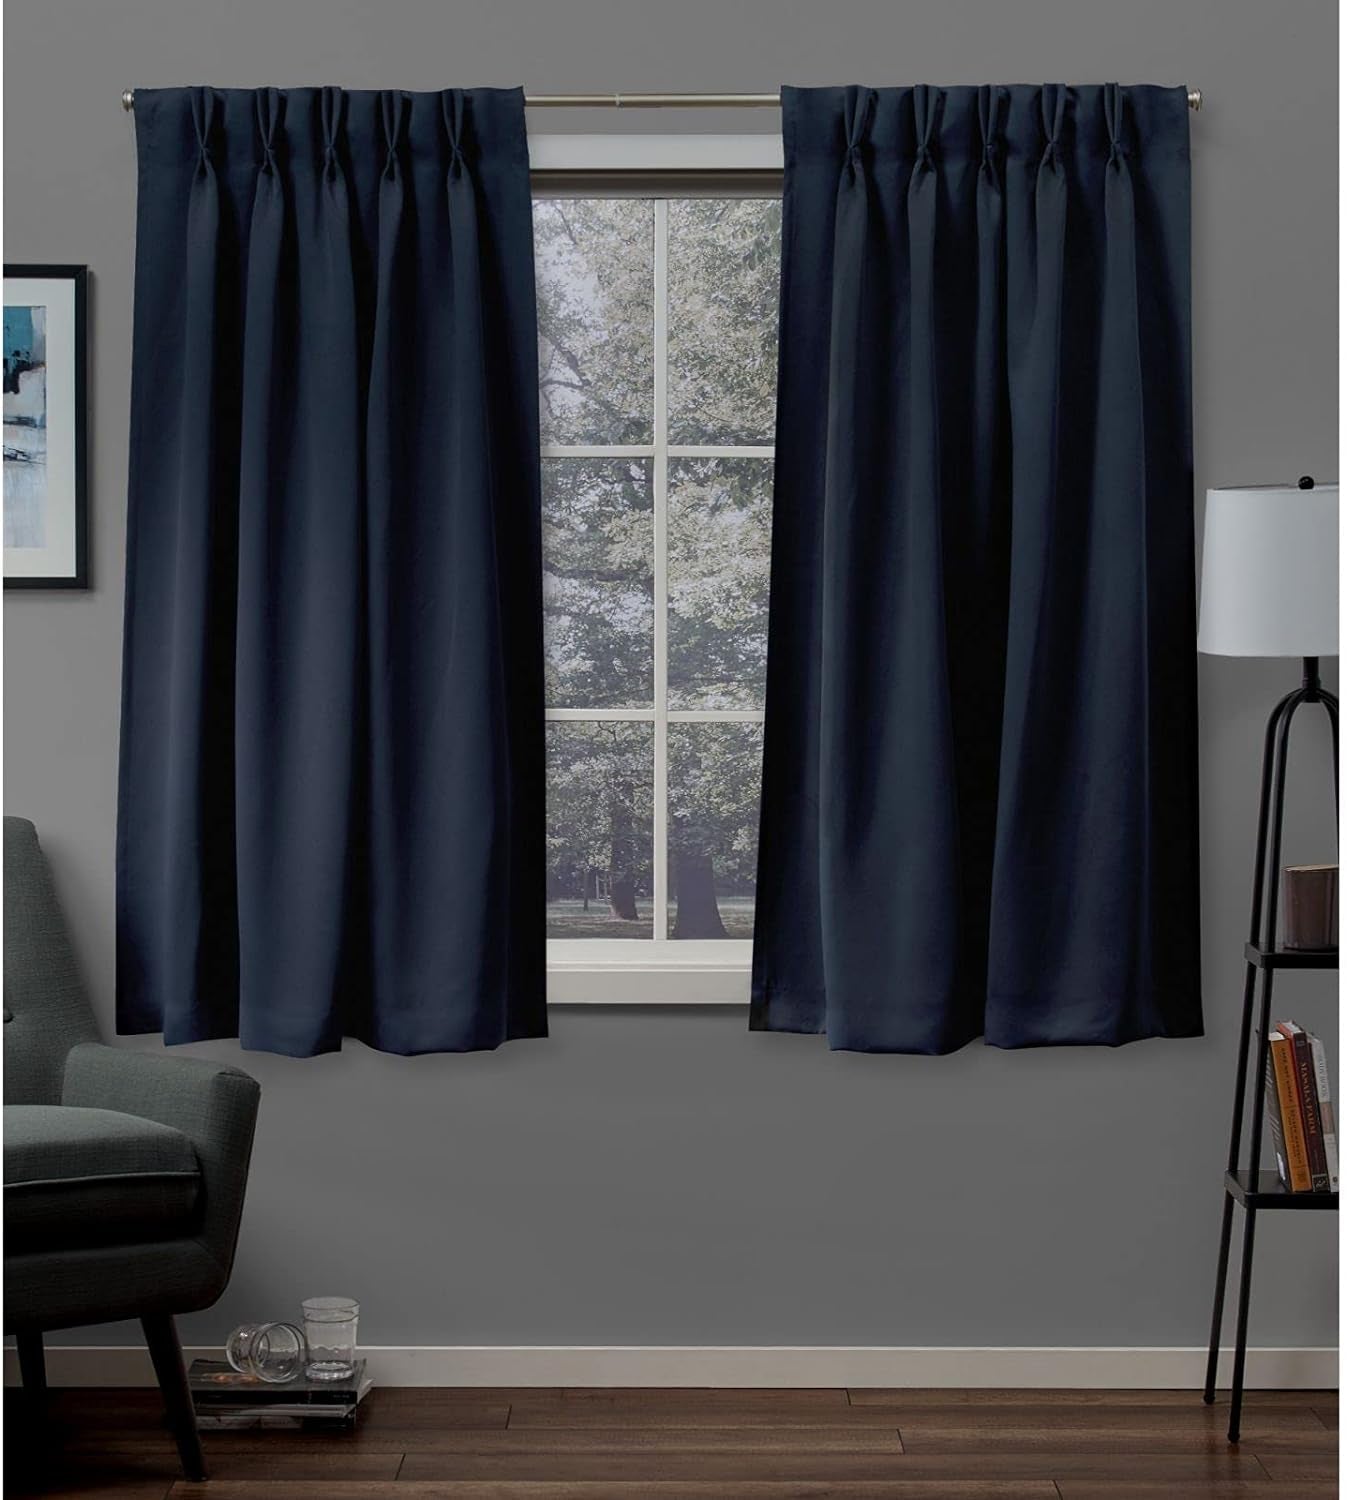 Exclusive Home Sateen Twill Woven Room Darkening Blackout Pinch Pleat/Hidden Tab Top Curtain Panel Pair, 63" Length, Charcoal  Exclusive Home Curtains Peacoat Blue 63" Length 